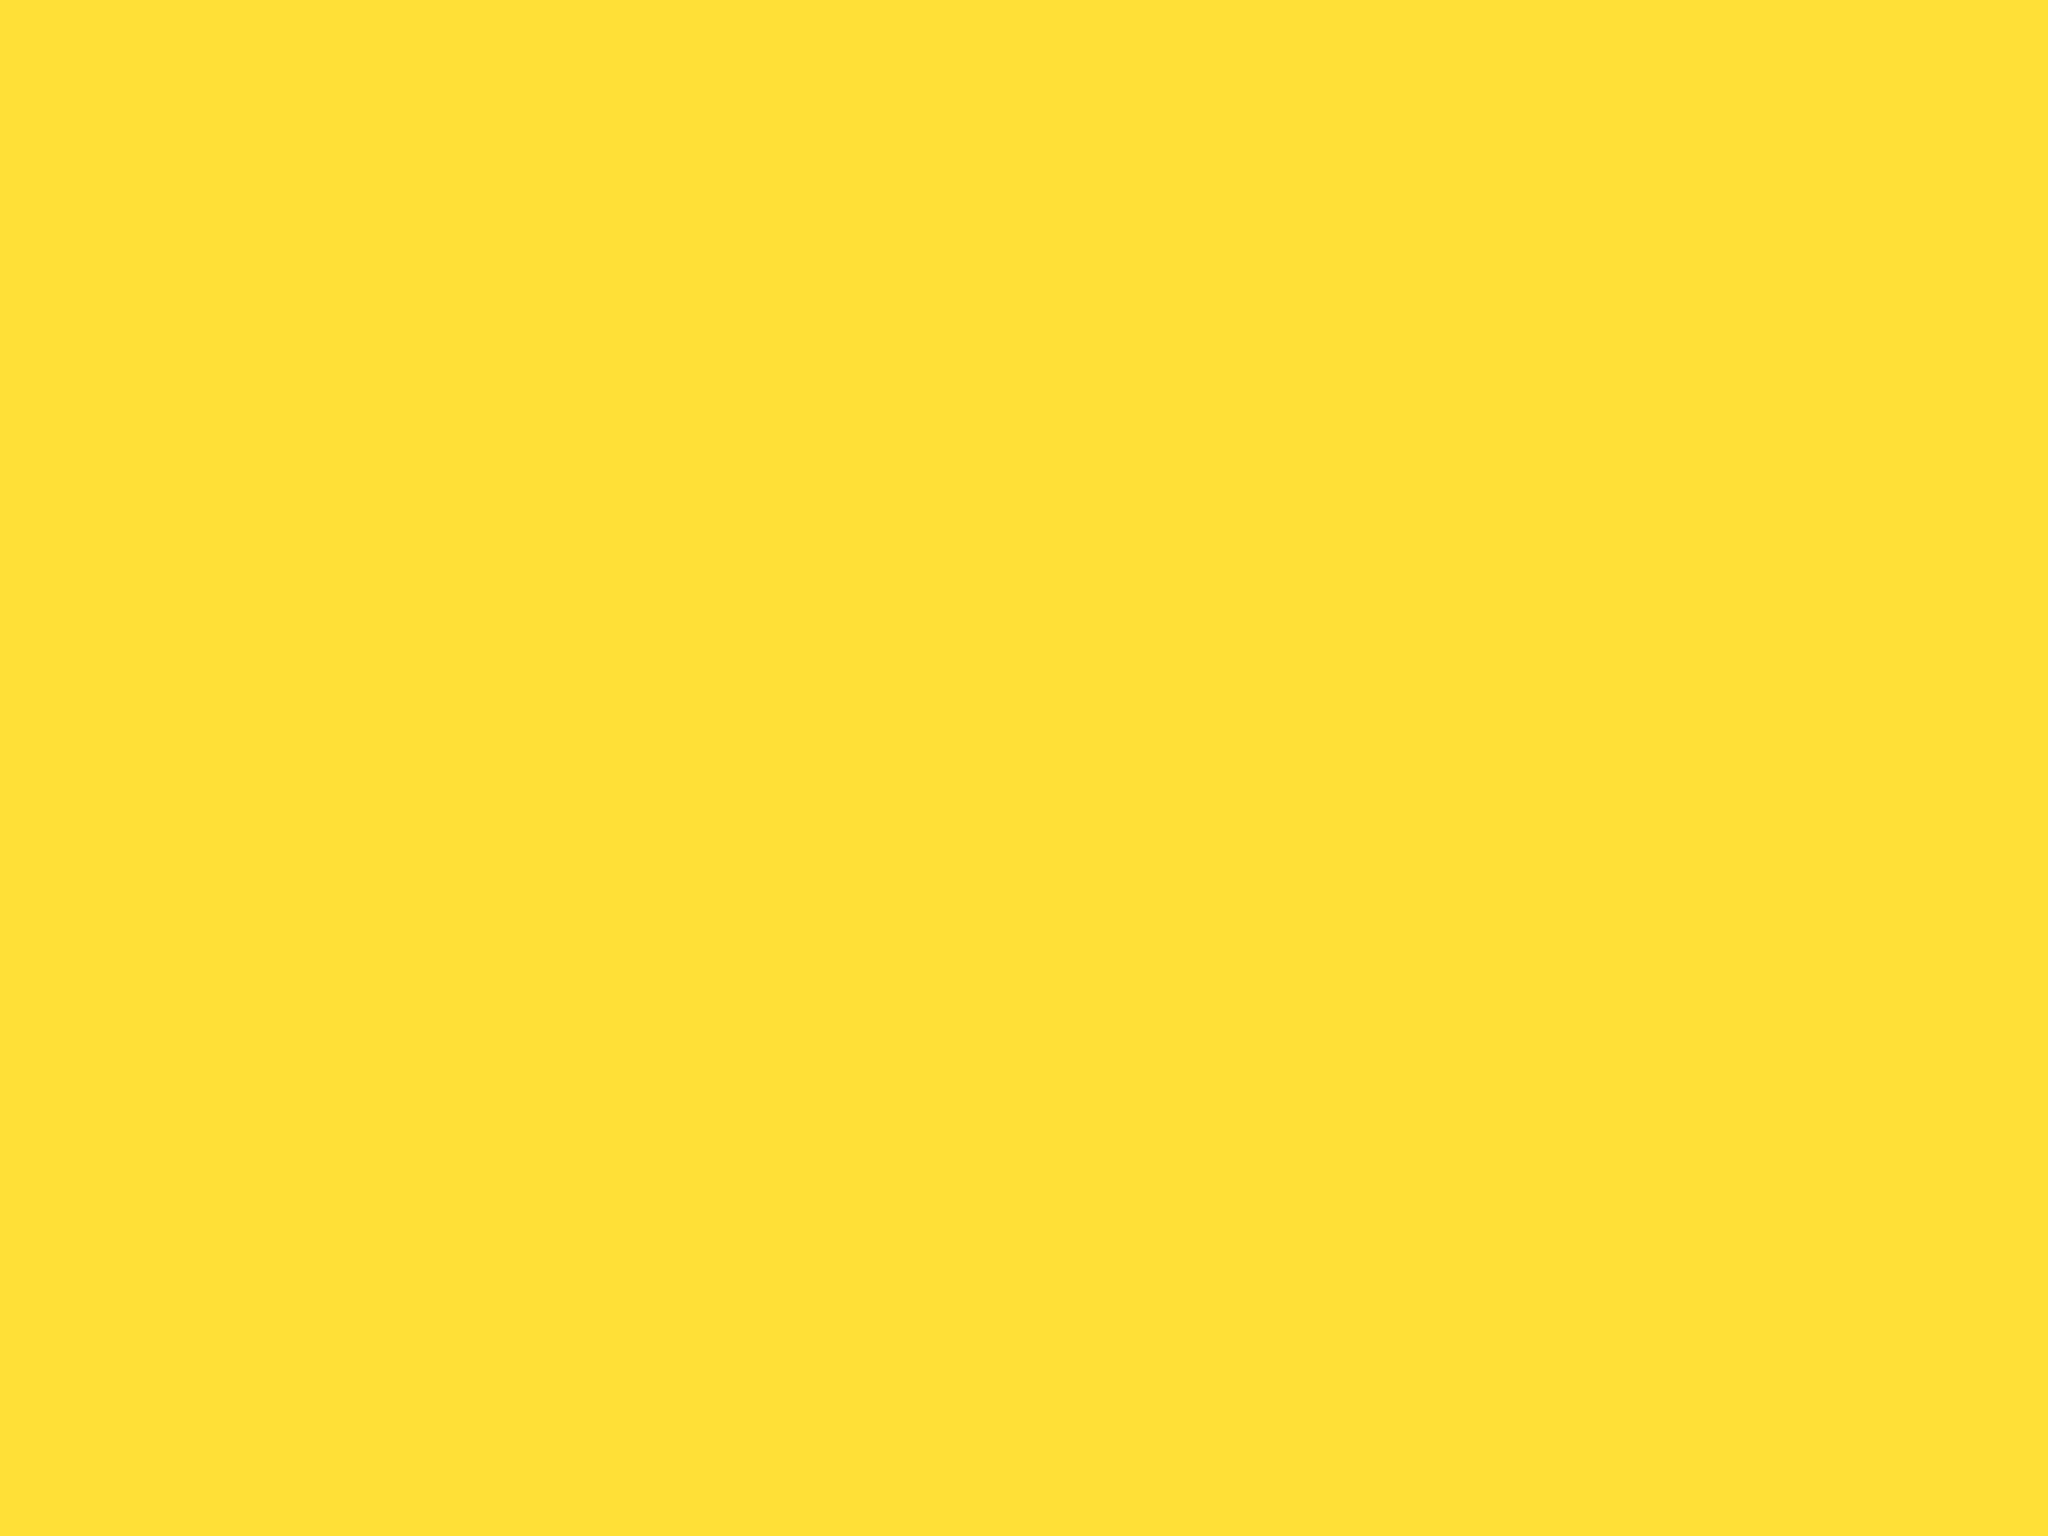 2048x1536 Banana Yellow Solid Color Background